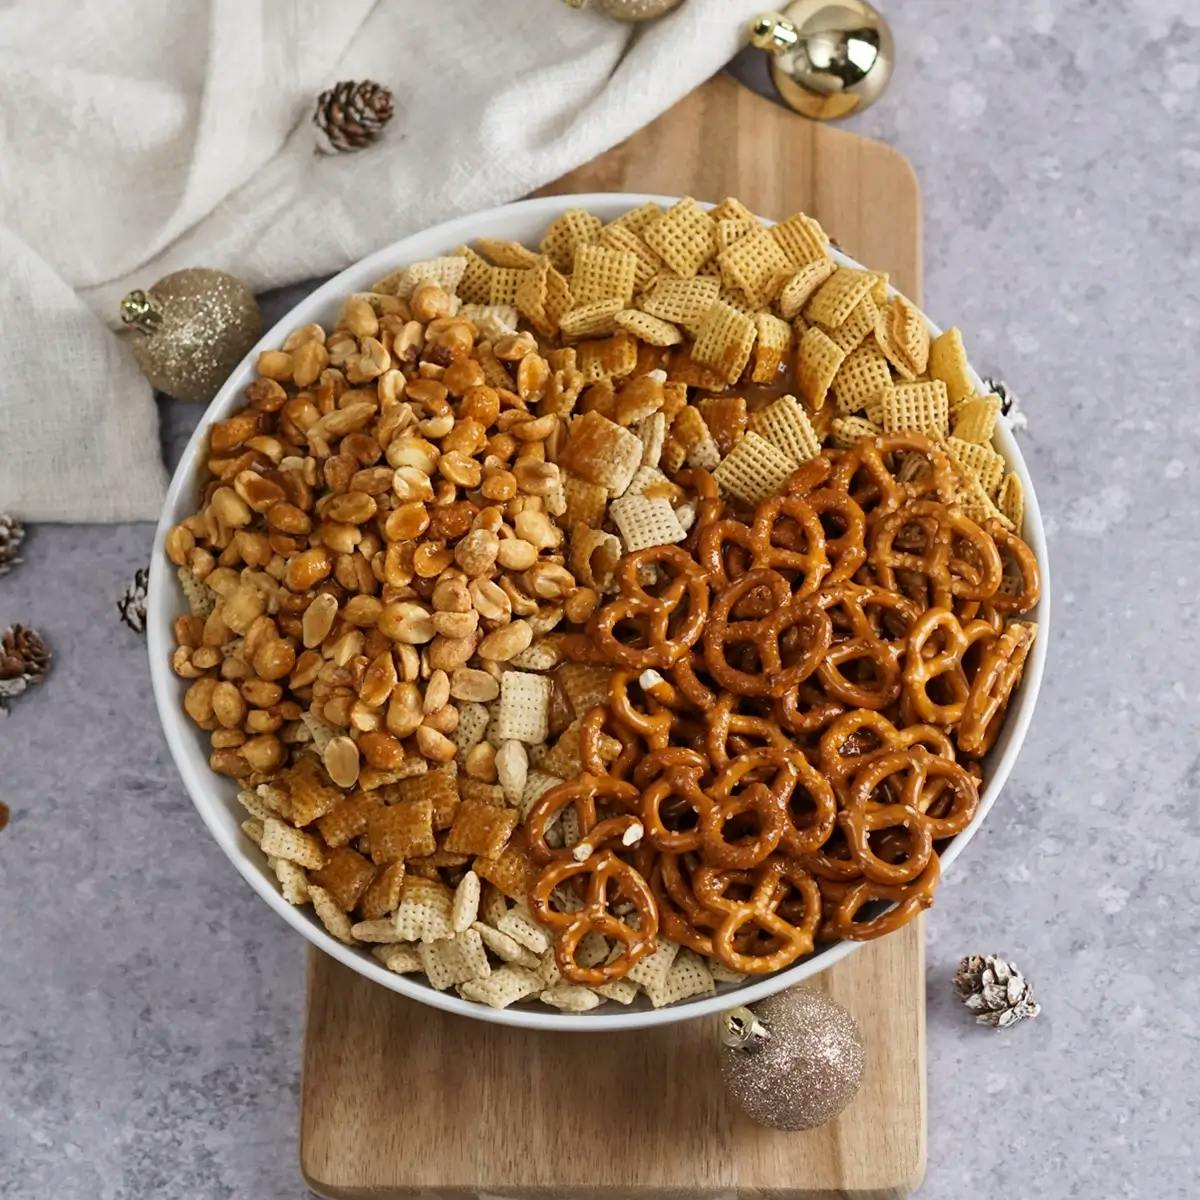 Rice chex, corn chex, pretzels and peanuts in a large bowl.